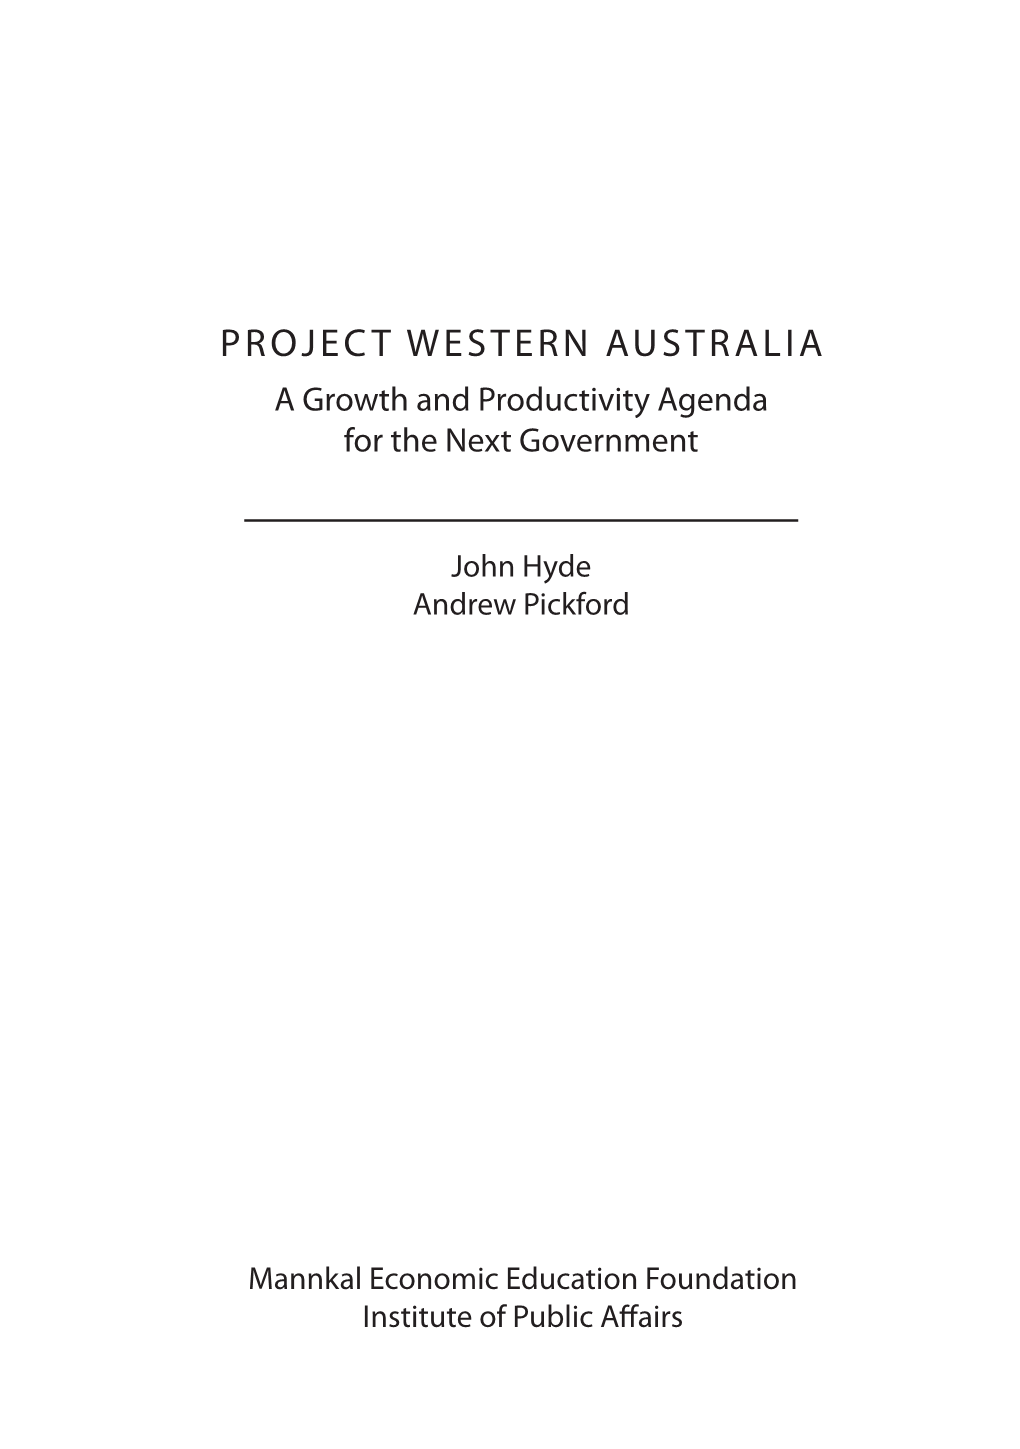 PROJECT WESTERN AUSTRALIA a Growth and Productivity Agenda for the Next Government